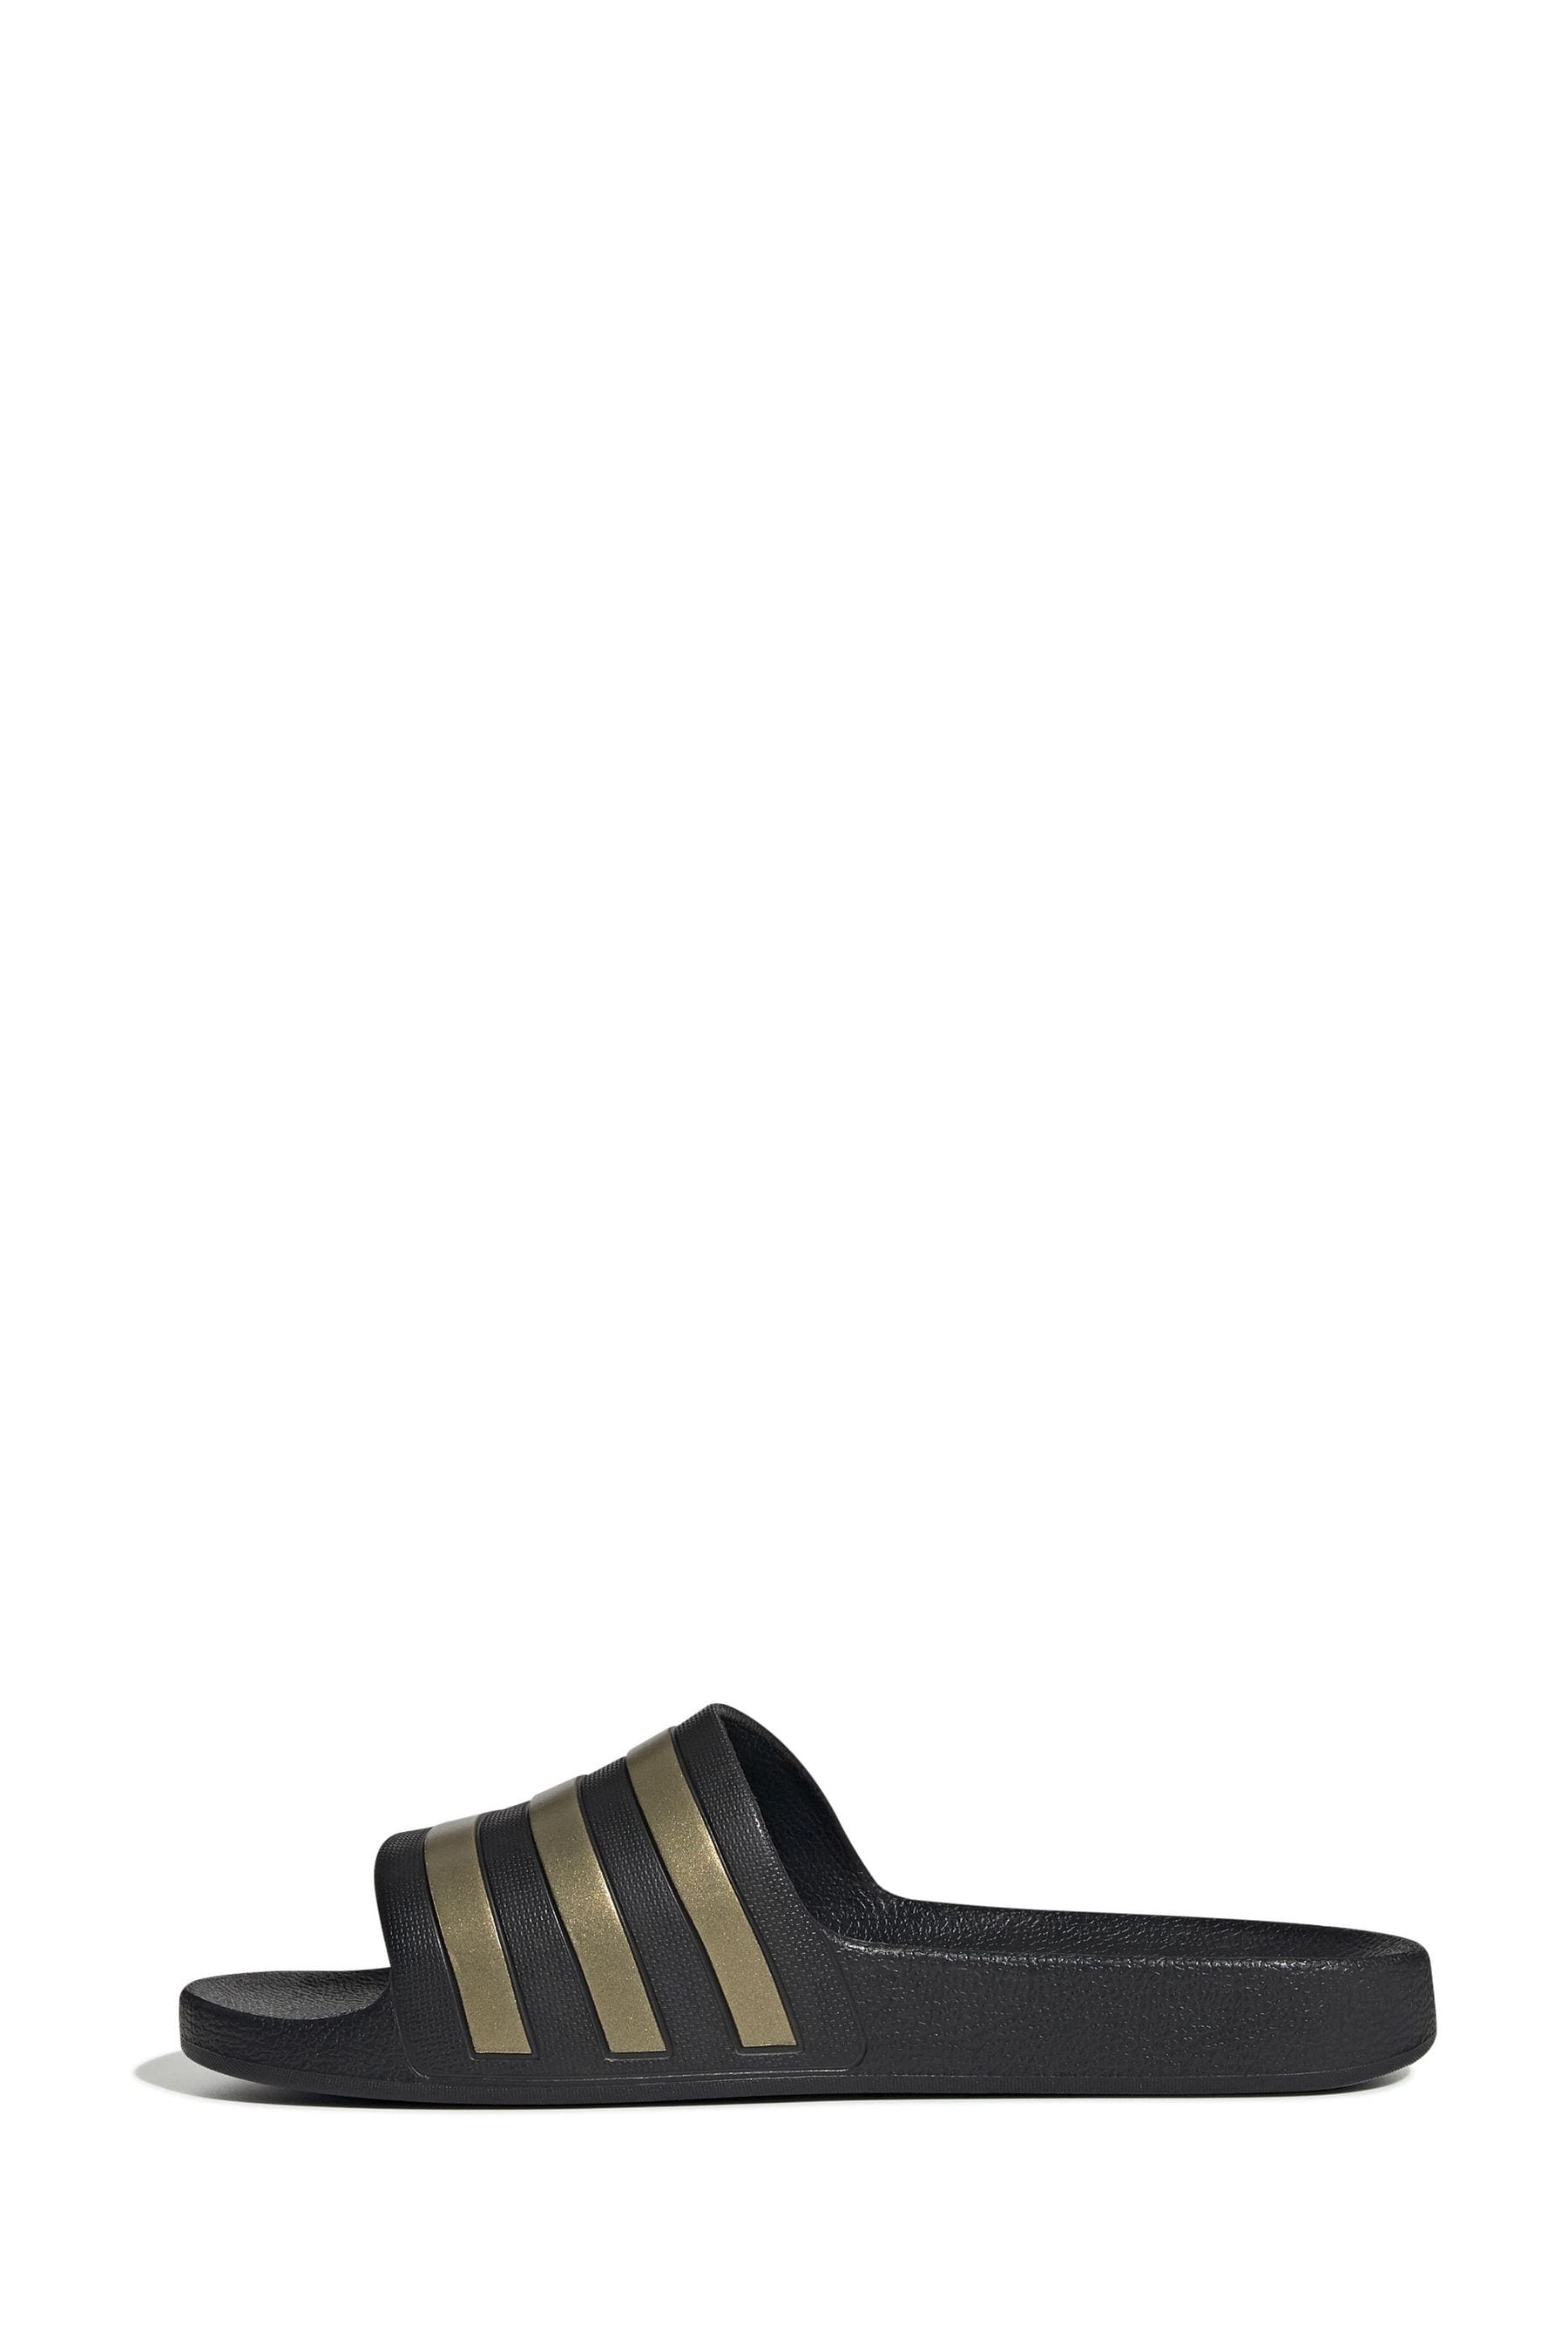 Buy adidas Adilette Sliders from the Next UK online shop